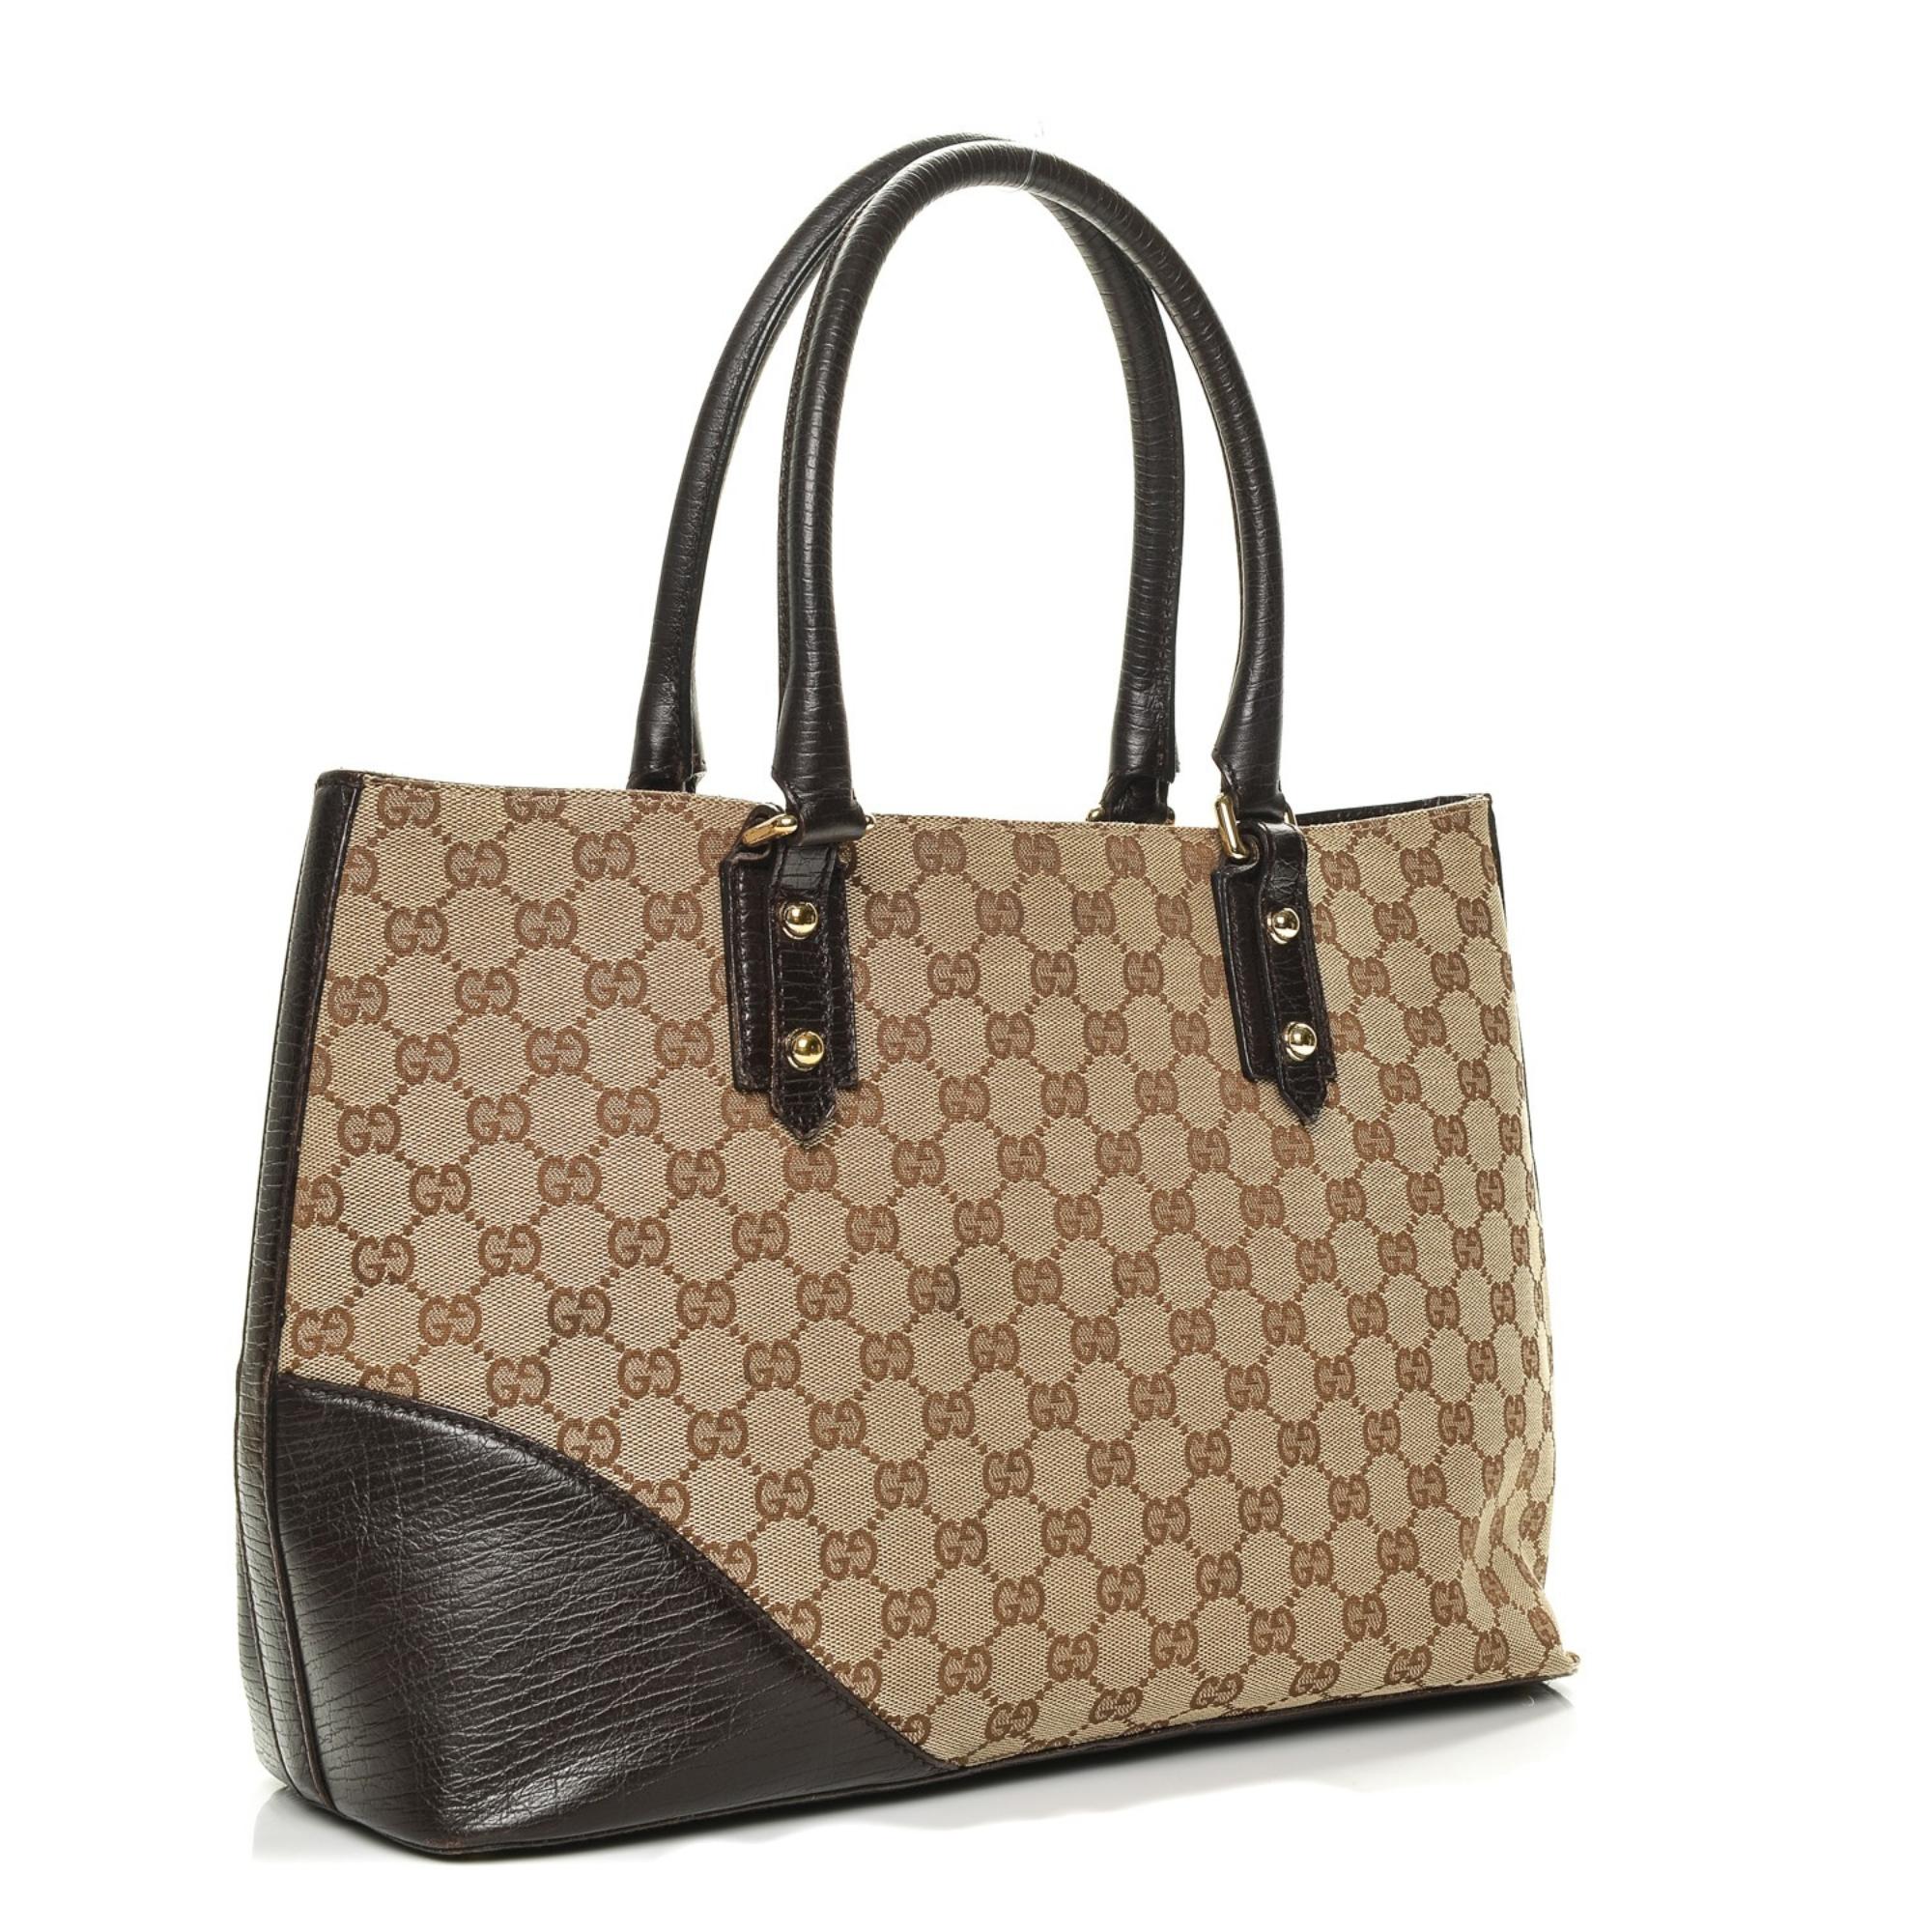 This tote is made of Gucci GG brown on beige monogram canvas. The handbag features dual tall brown rolled leather top handles, polished light brass links, brown leather anchors, a leather side patch and a light brass horsebit embellishment. There is